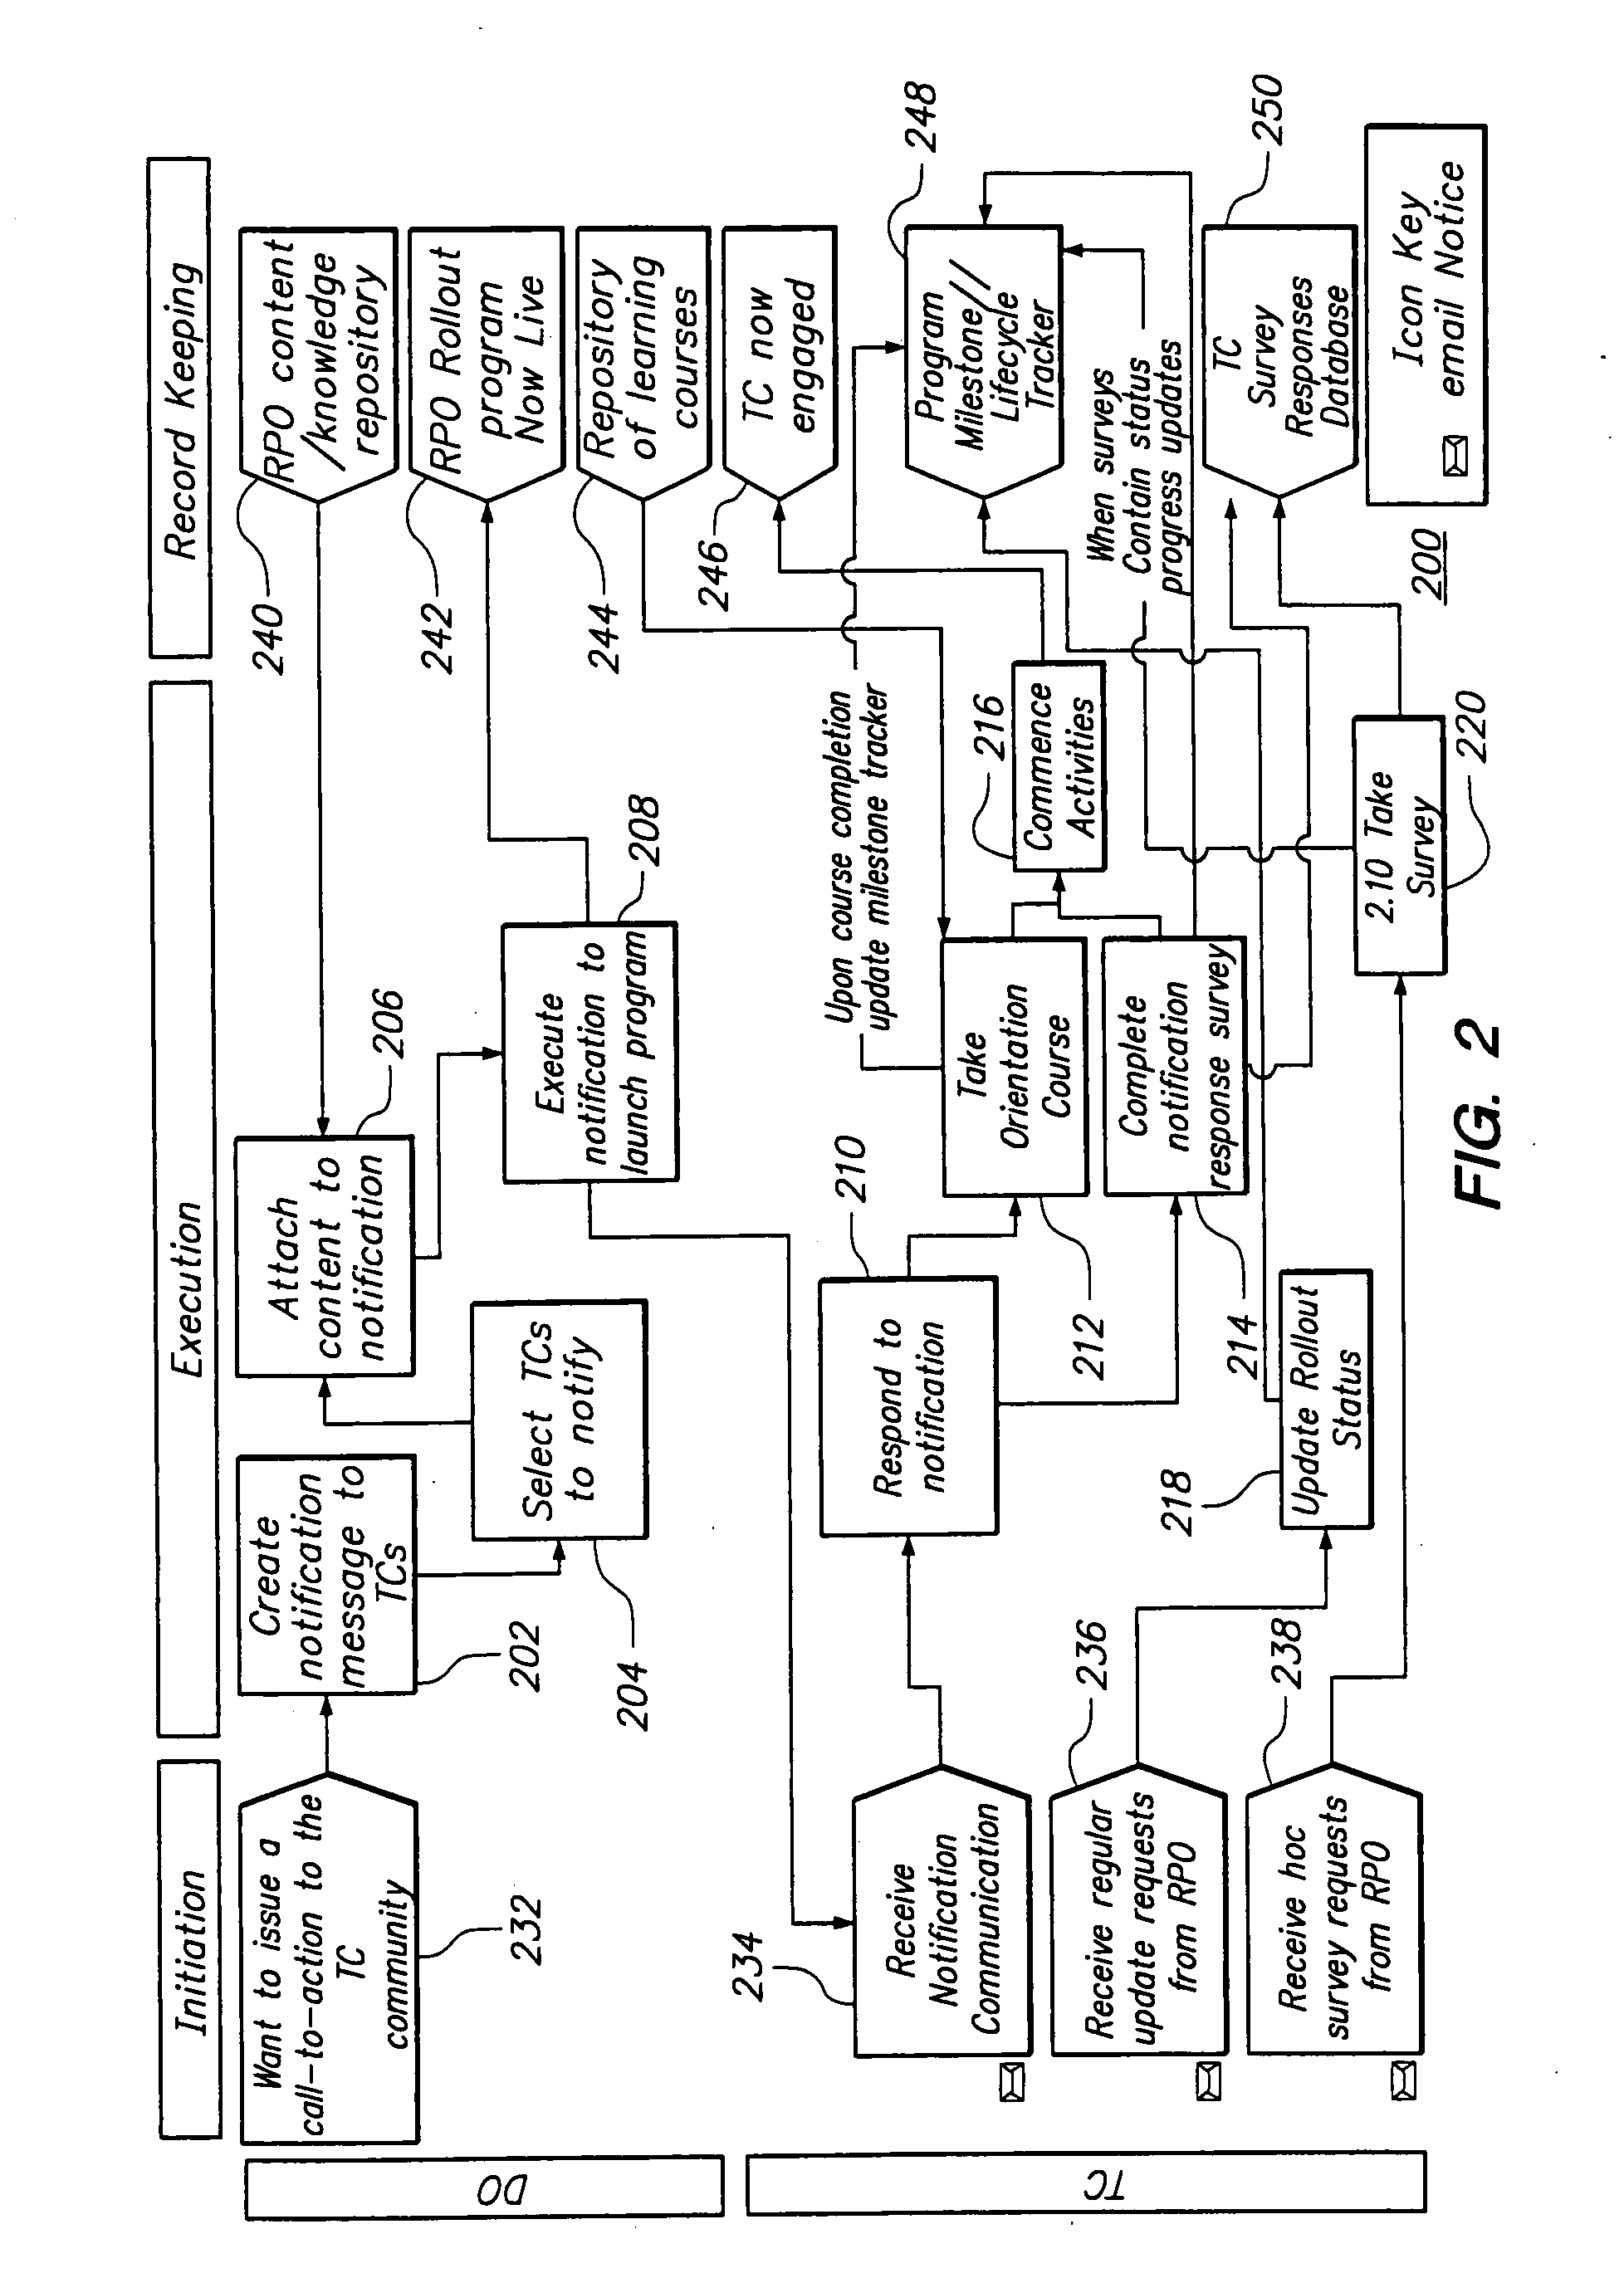 Systems, apparatus and methods for distributed deployment management